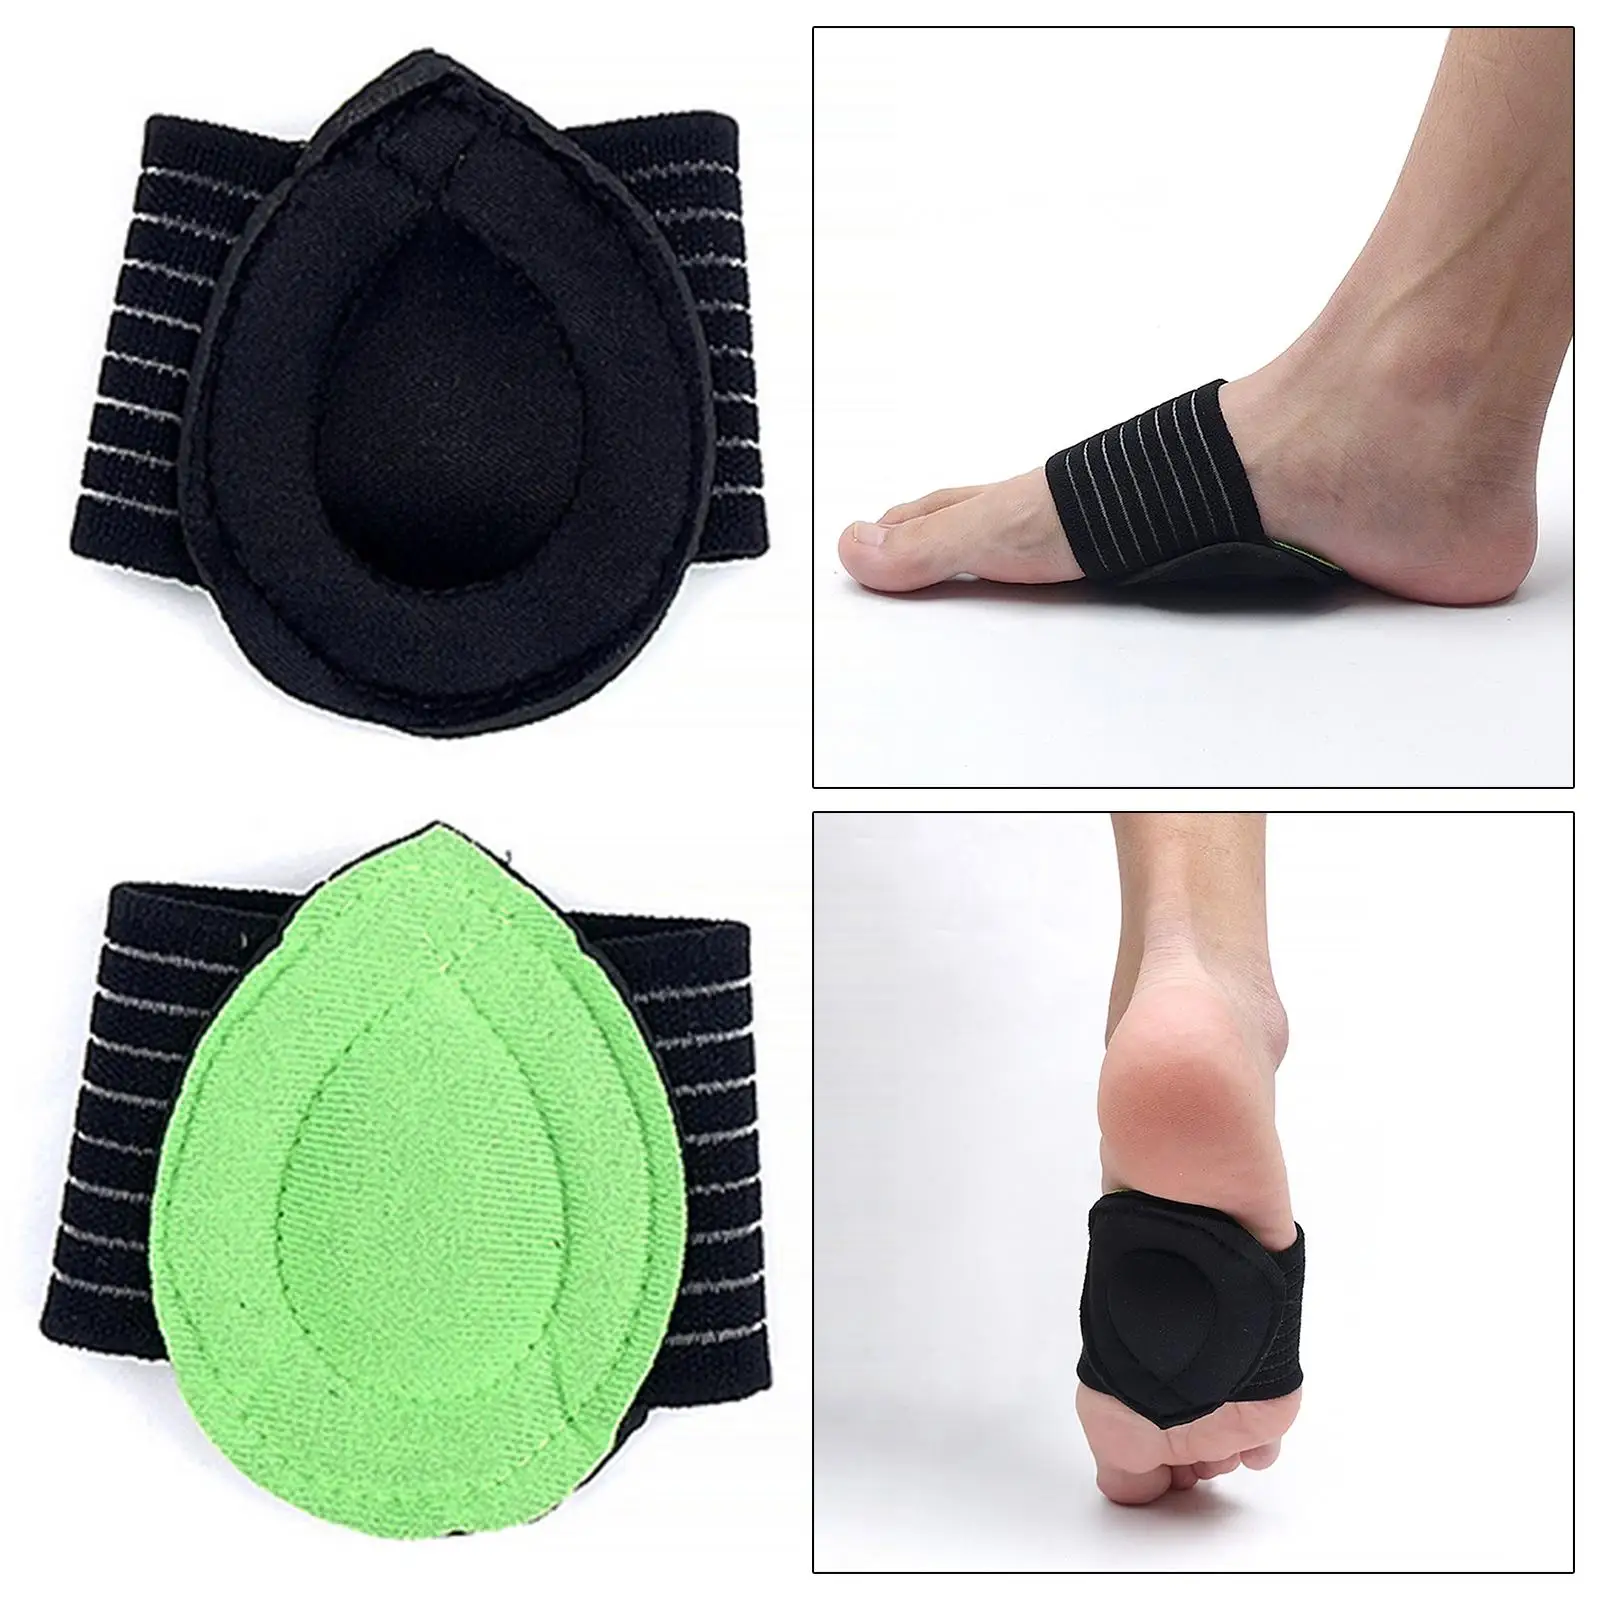 Flat Feet Arch Support Foot Brace Unisex Cushioned Compression Pads for Fallen Arches Fasciitis Varus Shoe Inserts Foot Relief